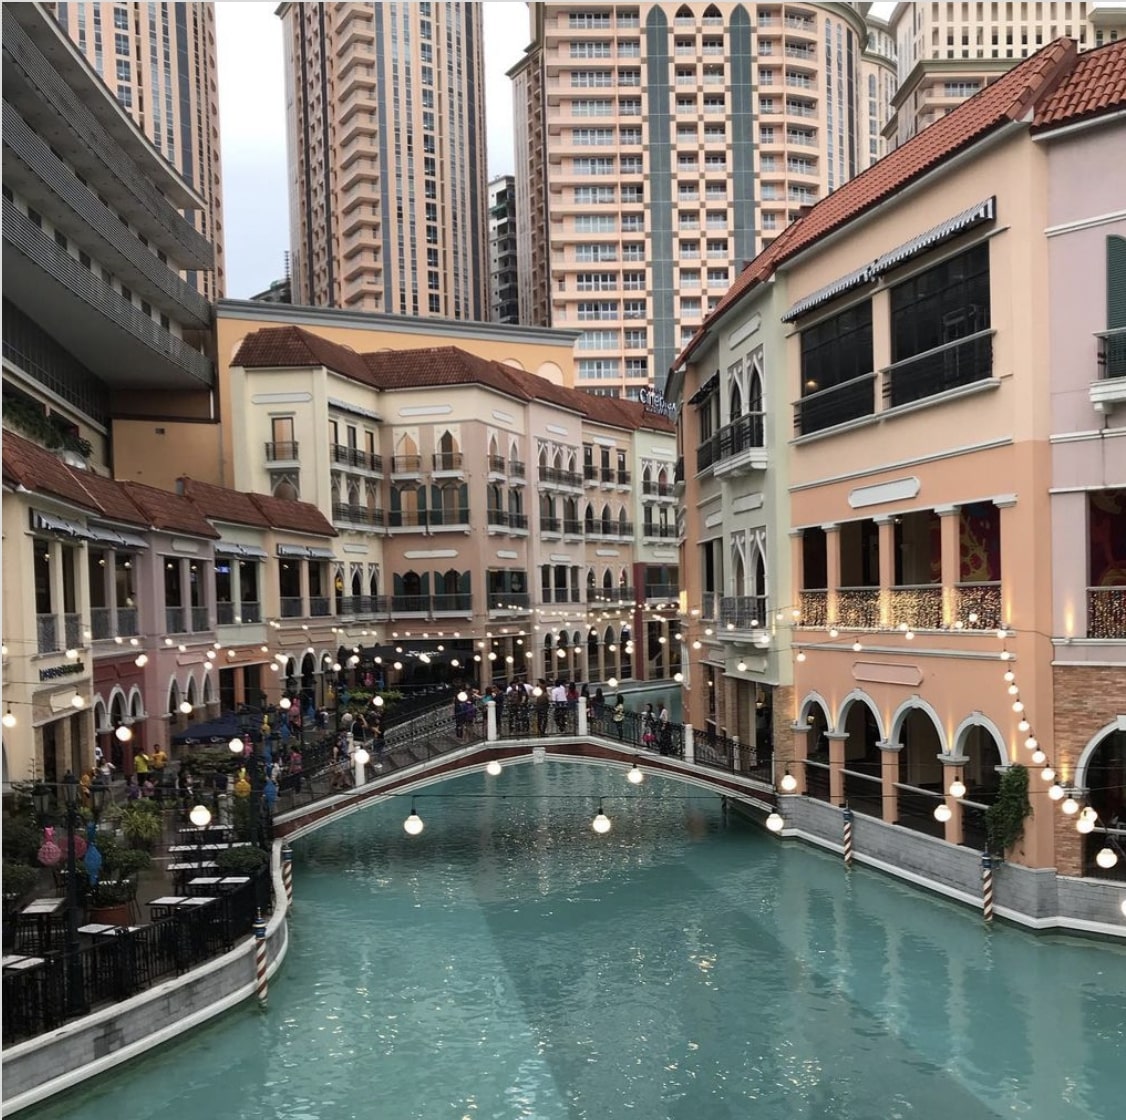 approved locations for kids - venice grand canal mall